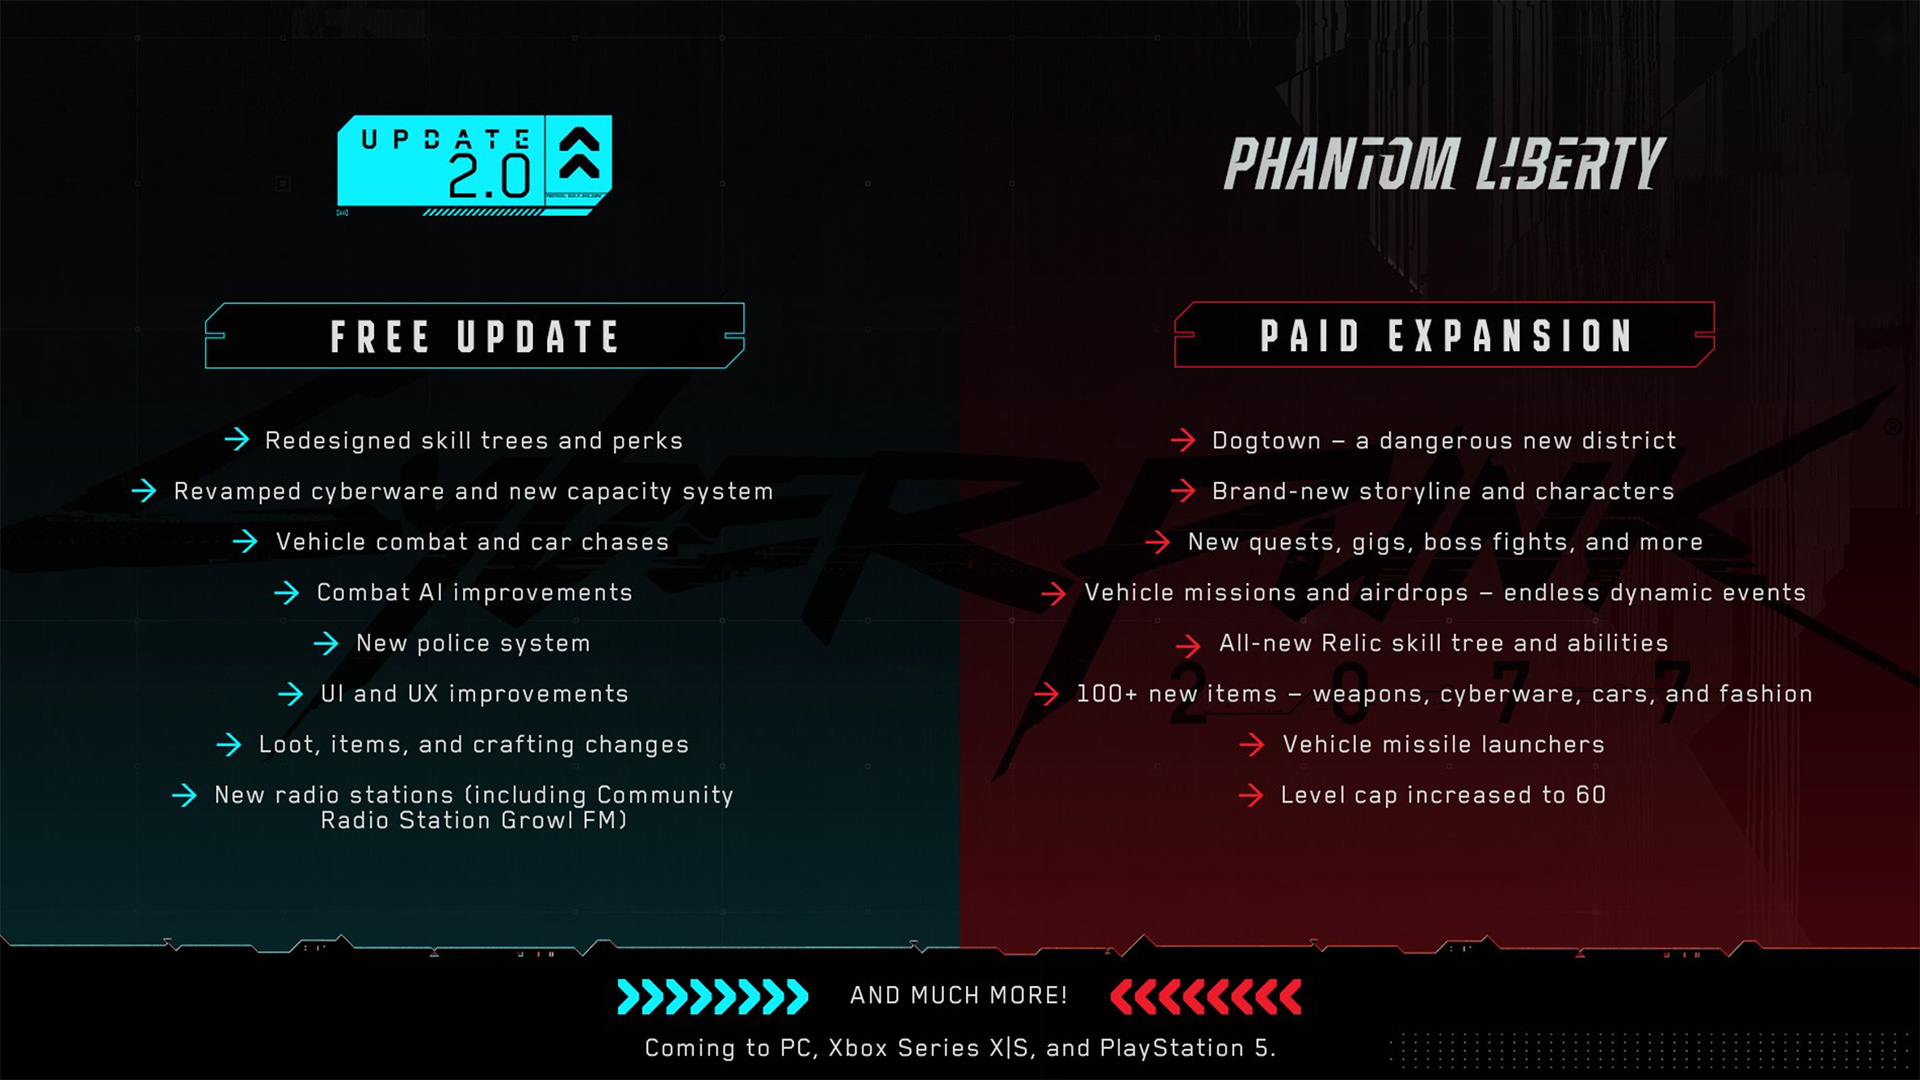 What to expect from Cyberpunk2077 FREE Update 2.0 and Phantom Liberty Paid Expansion